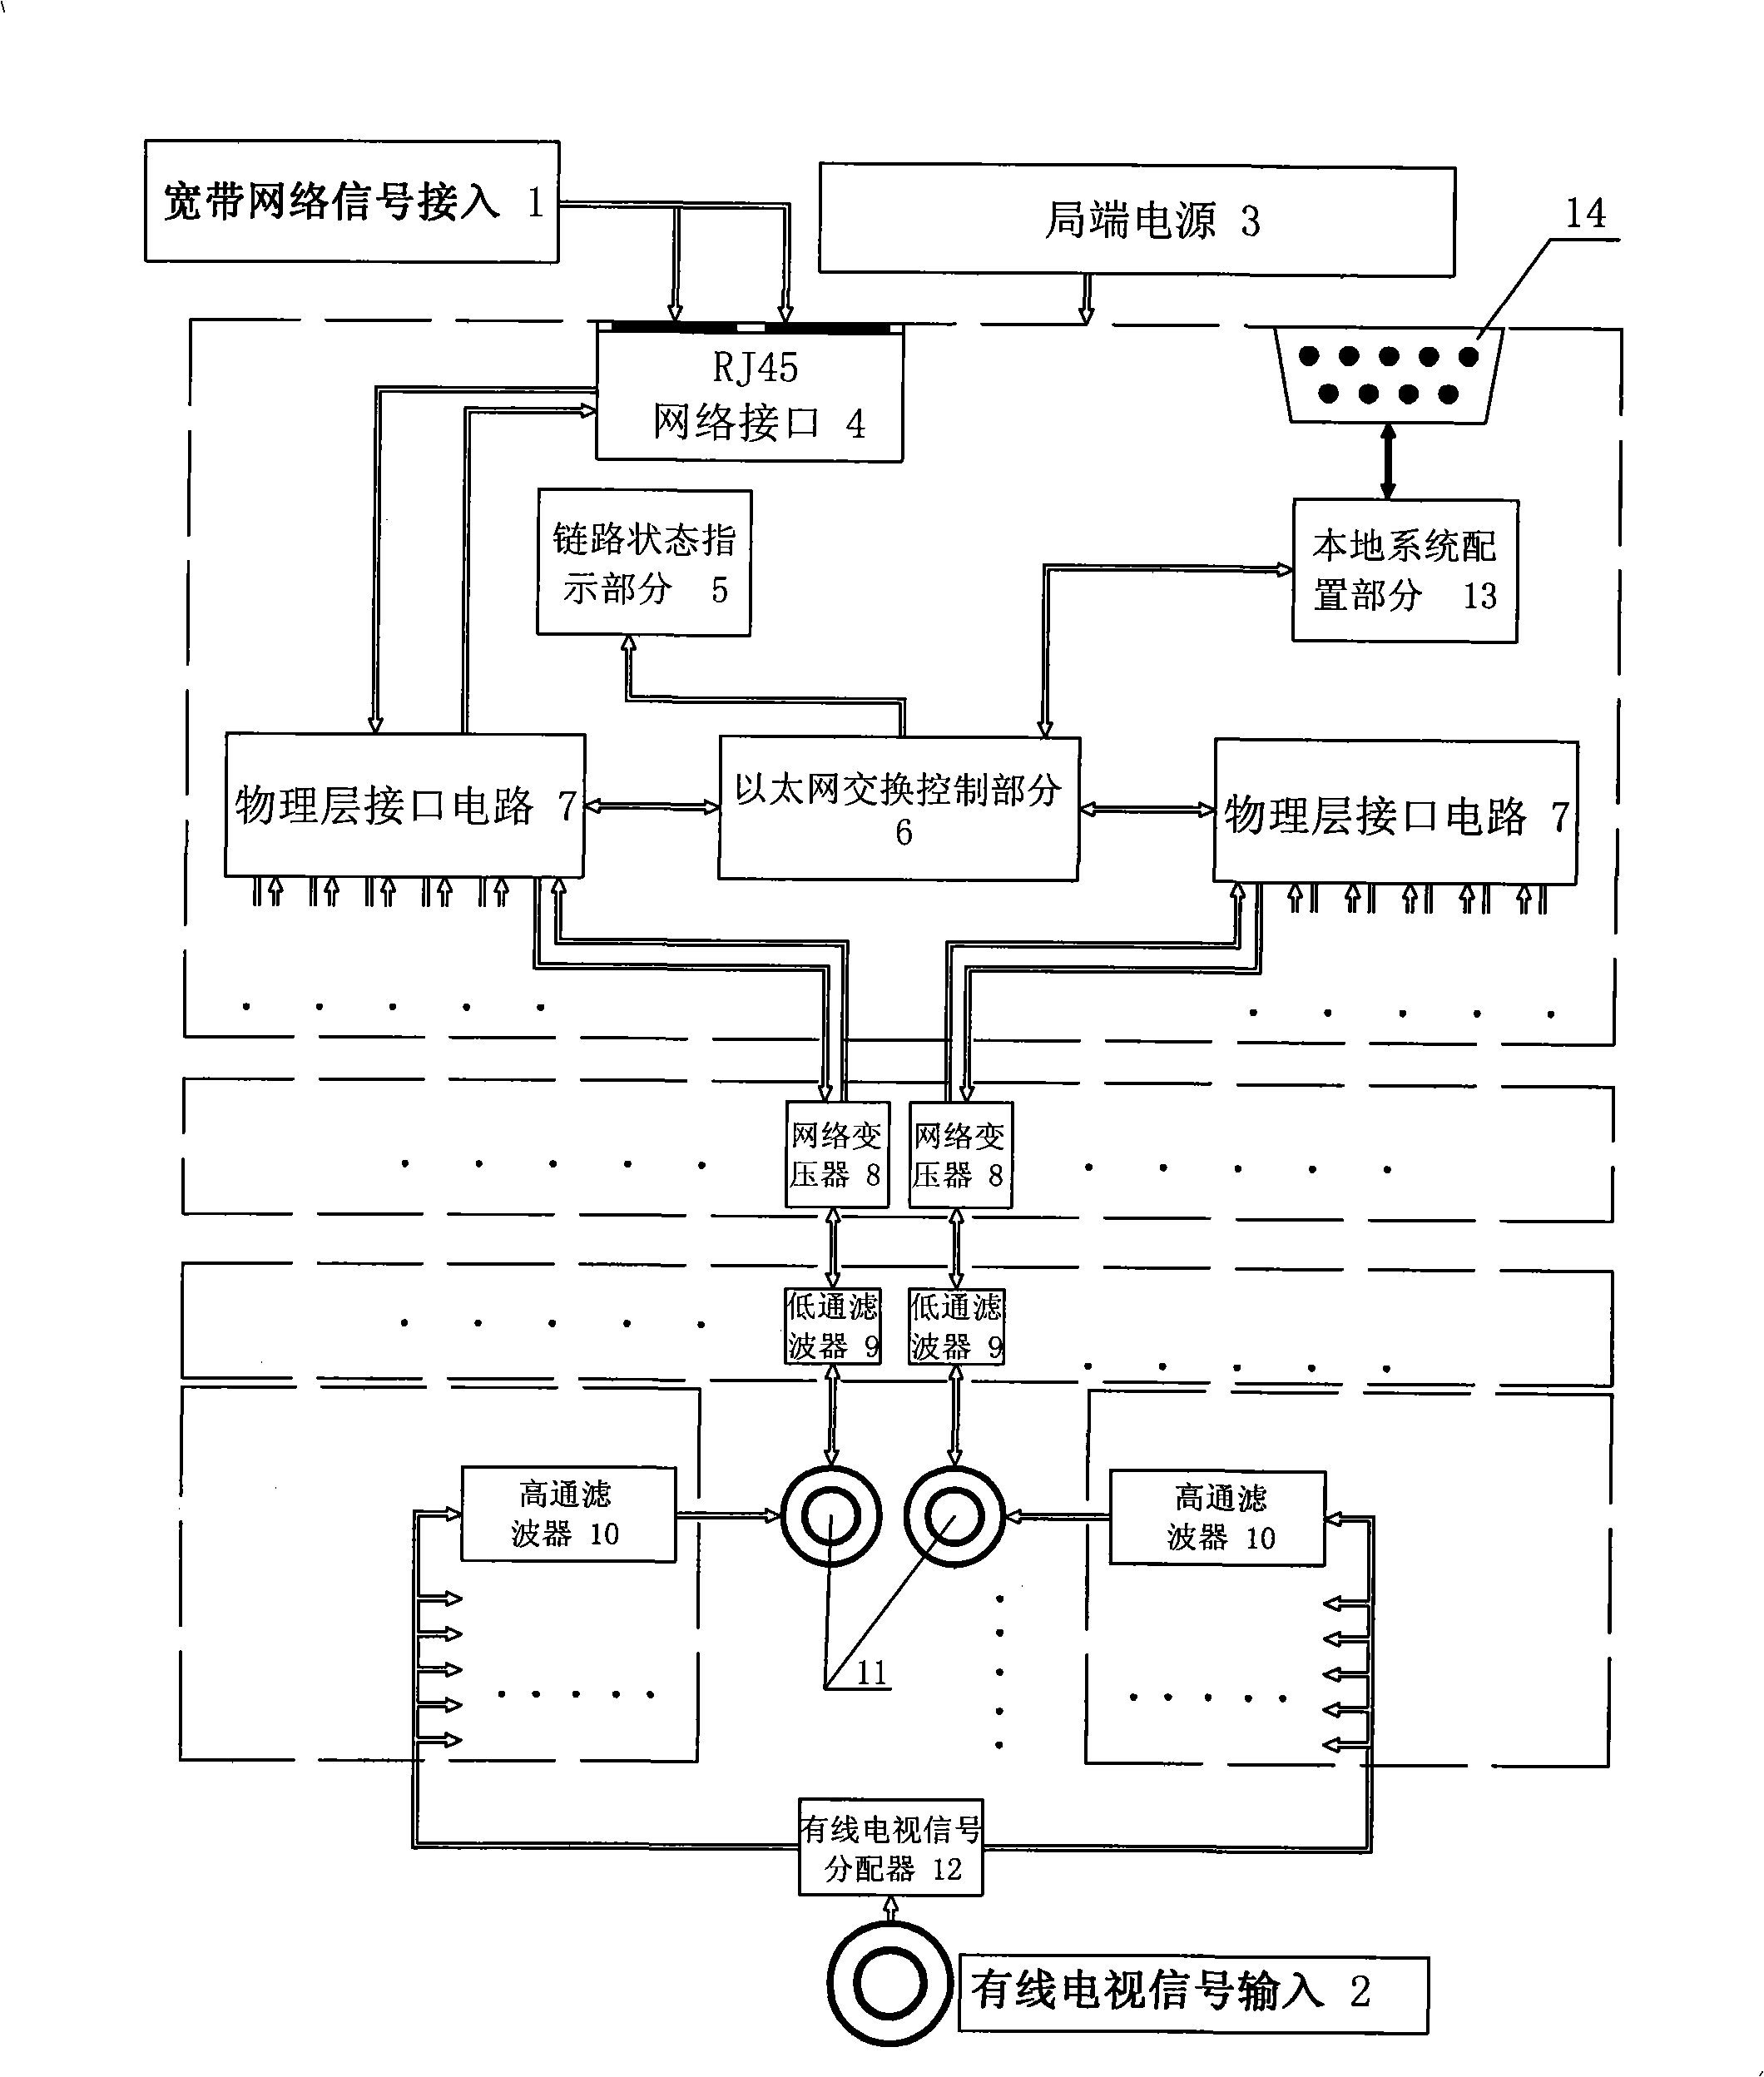 Ethernet switching system based on cable TV transmission network